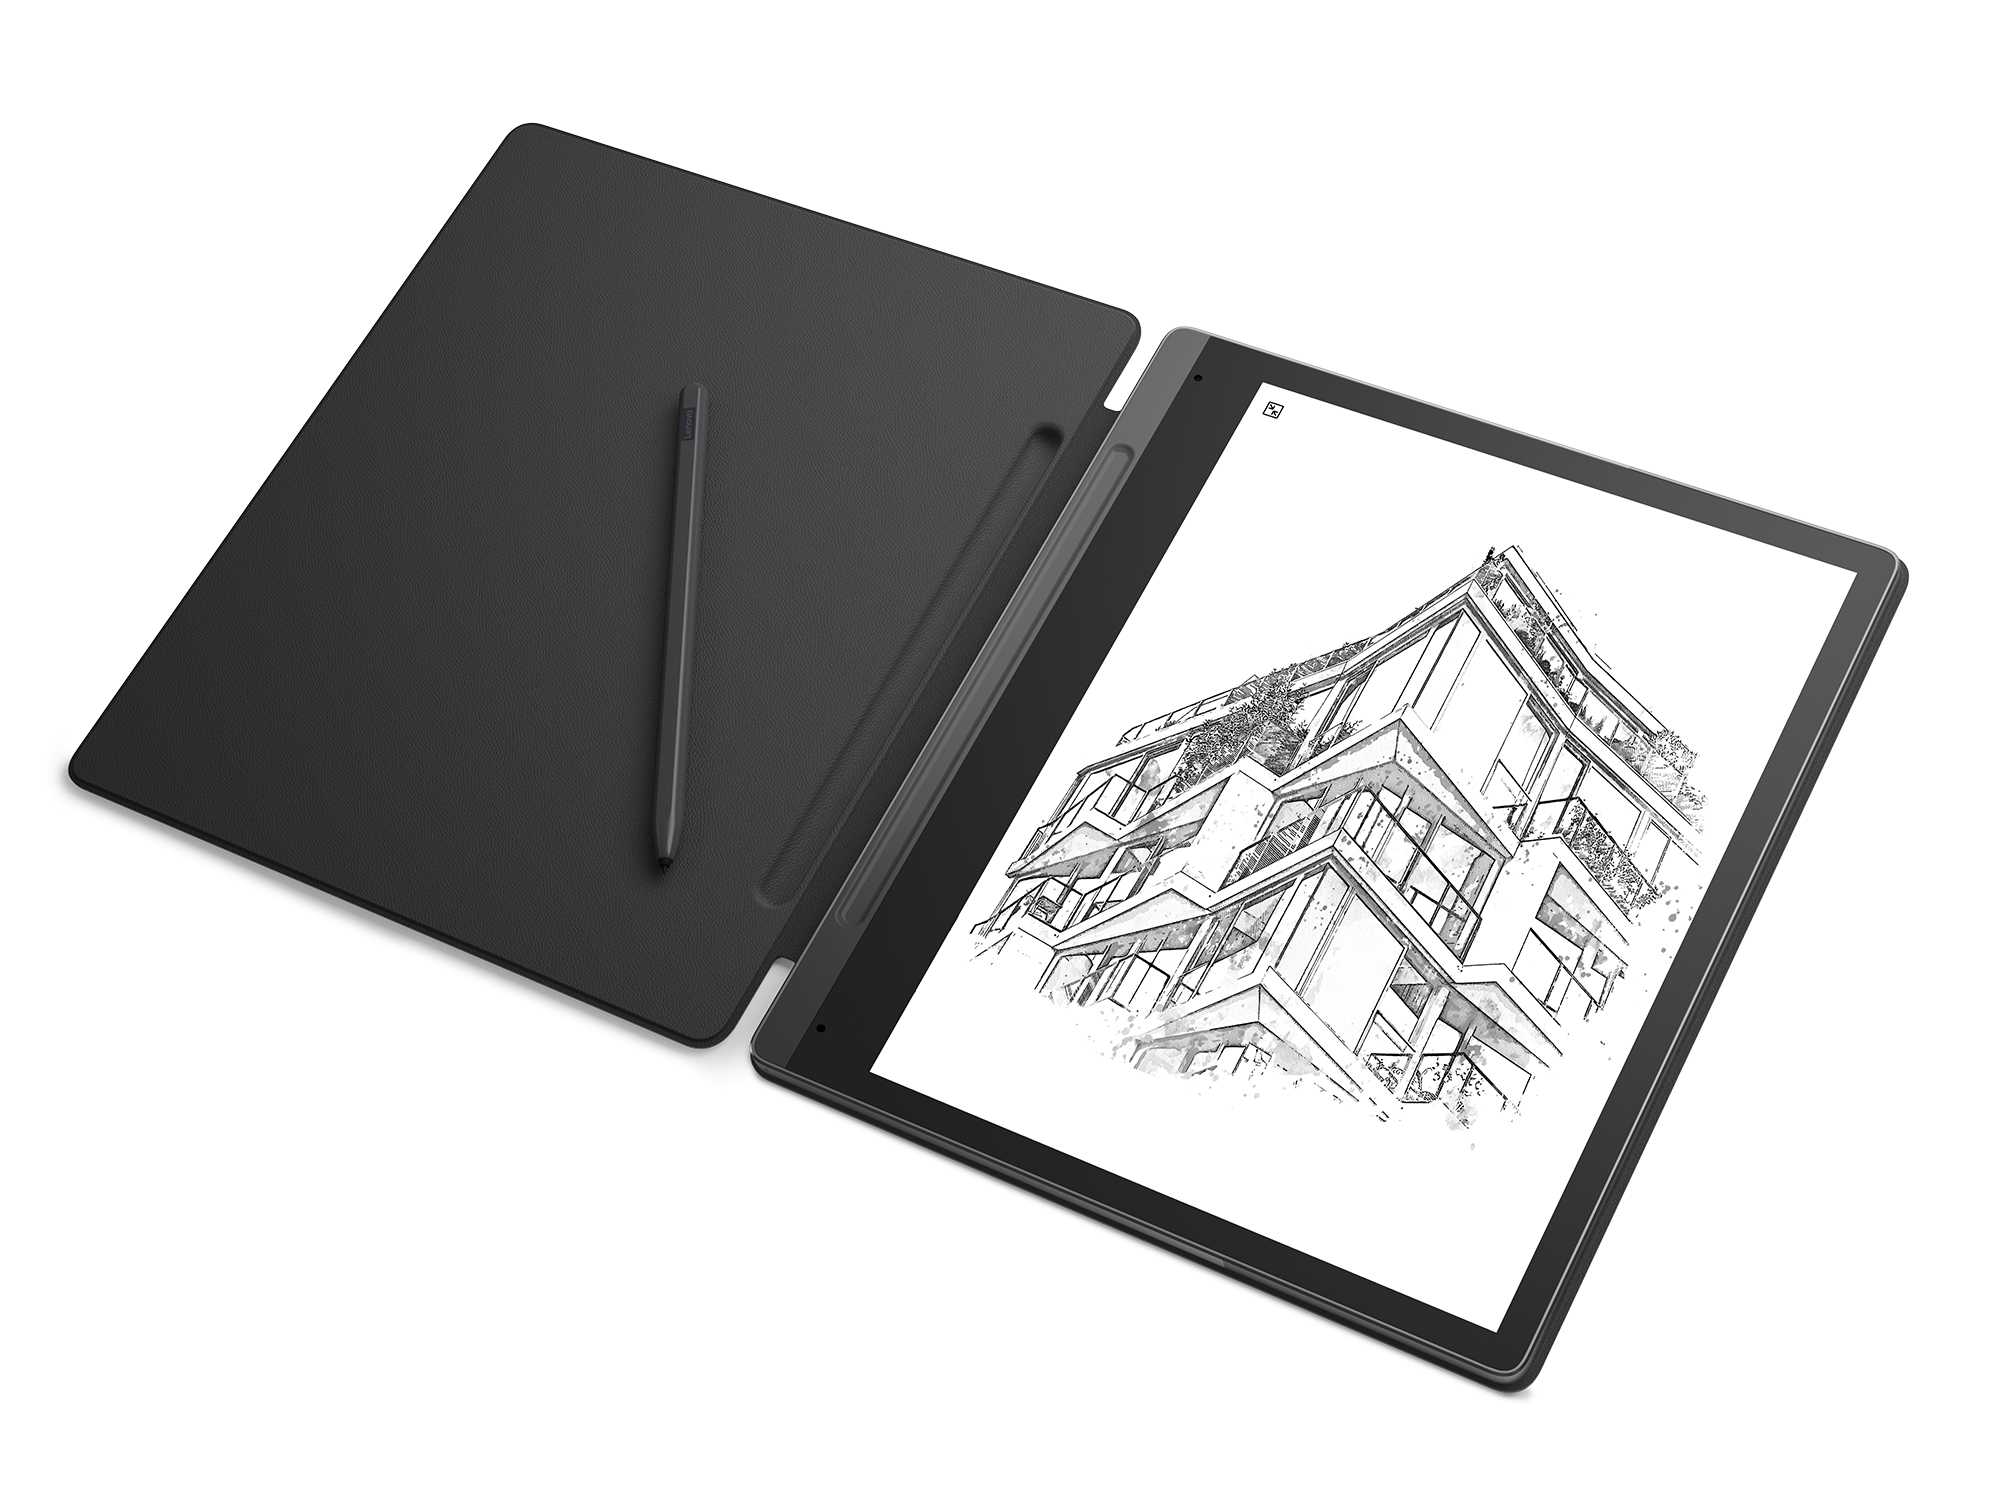 CES 2023: Lenovo's Smart Paper could be a Kindle Scribe killer